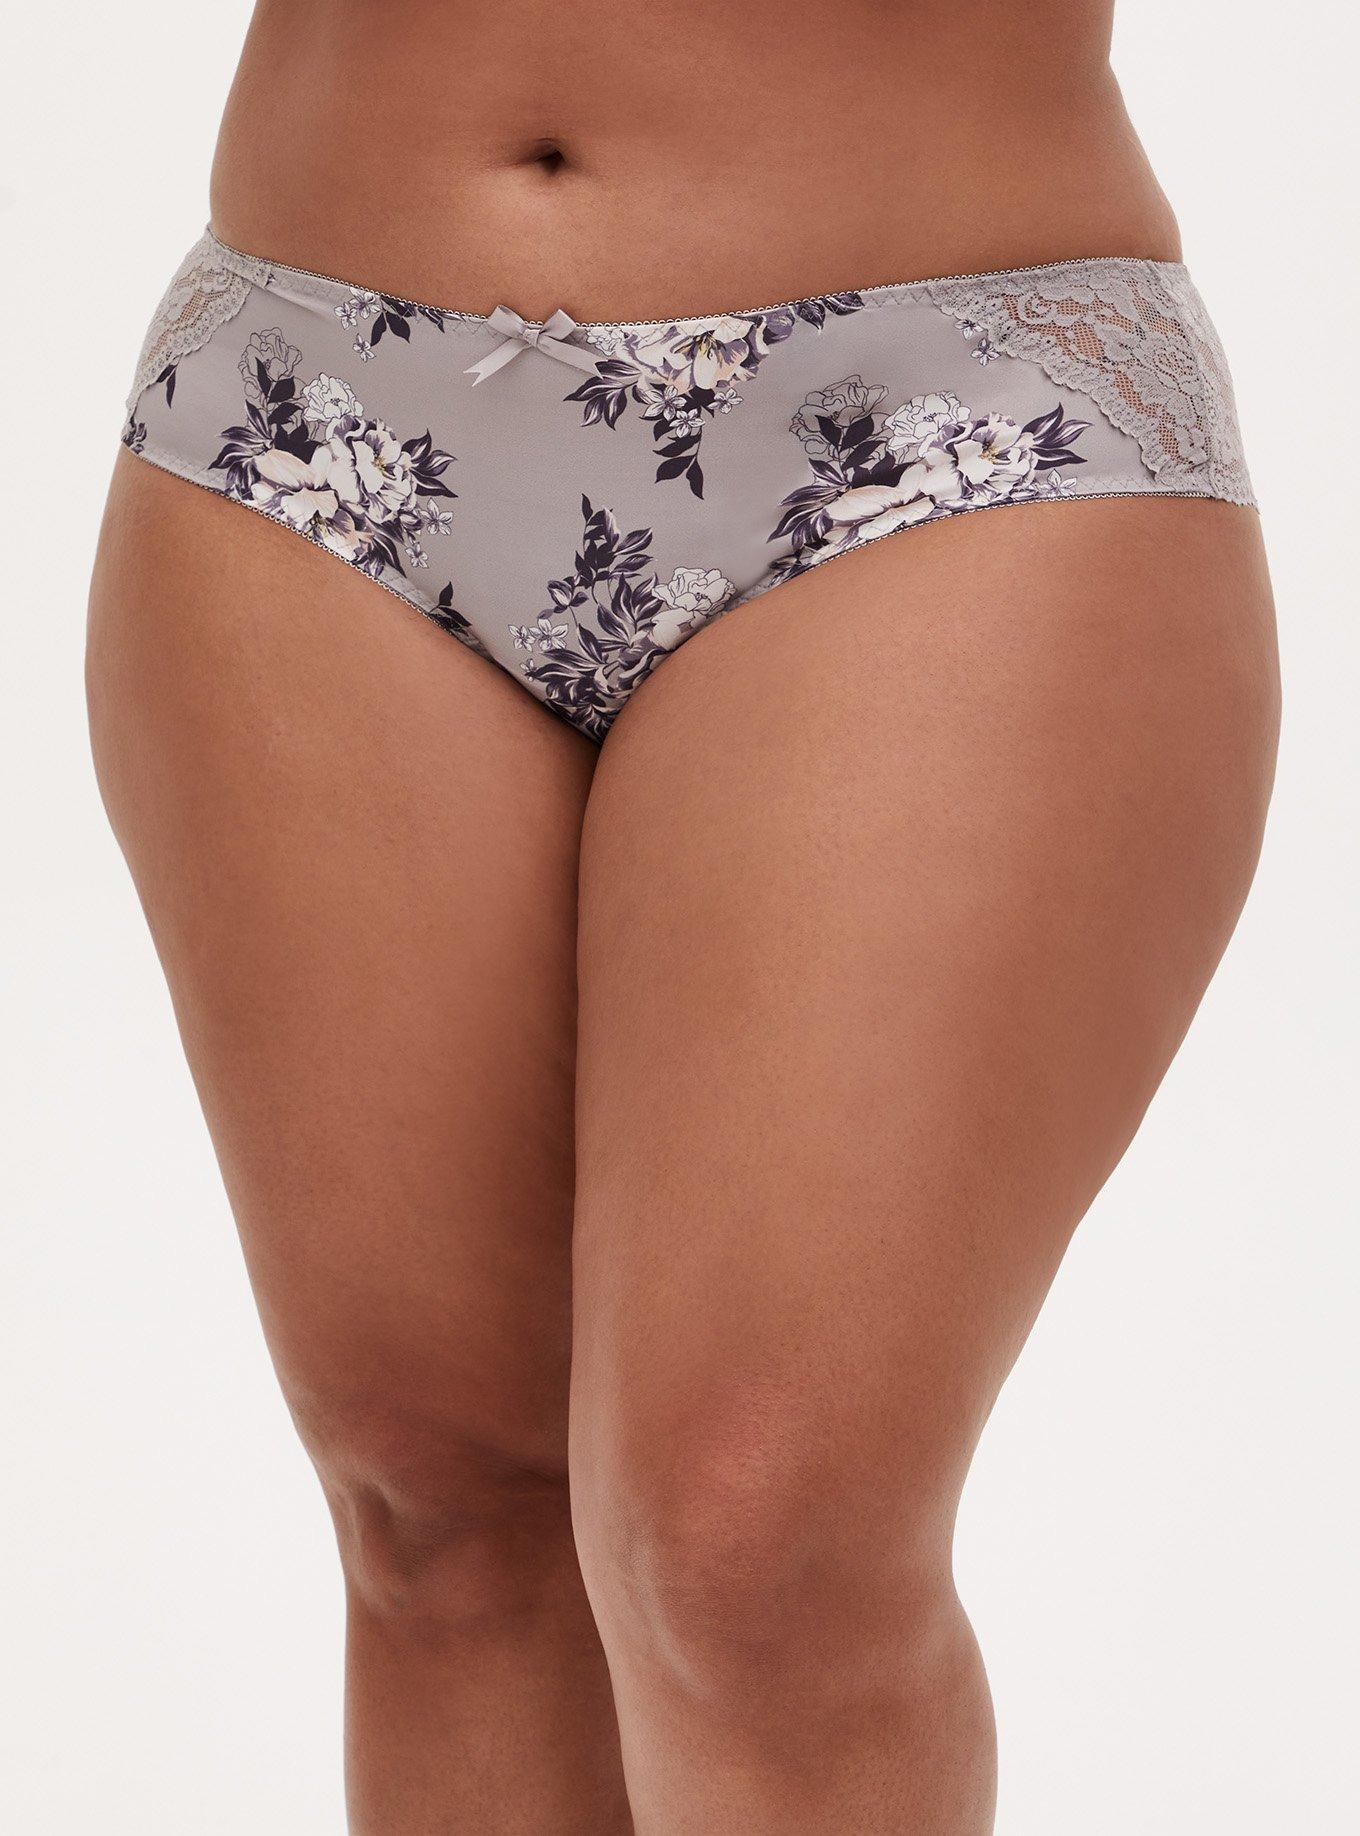 Floral Lace Shiny Sexy Hipsters Panties